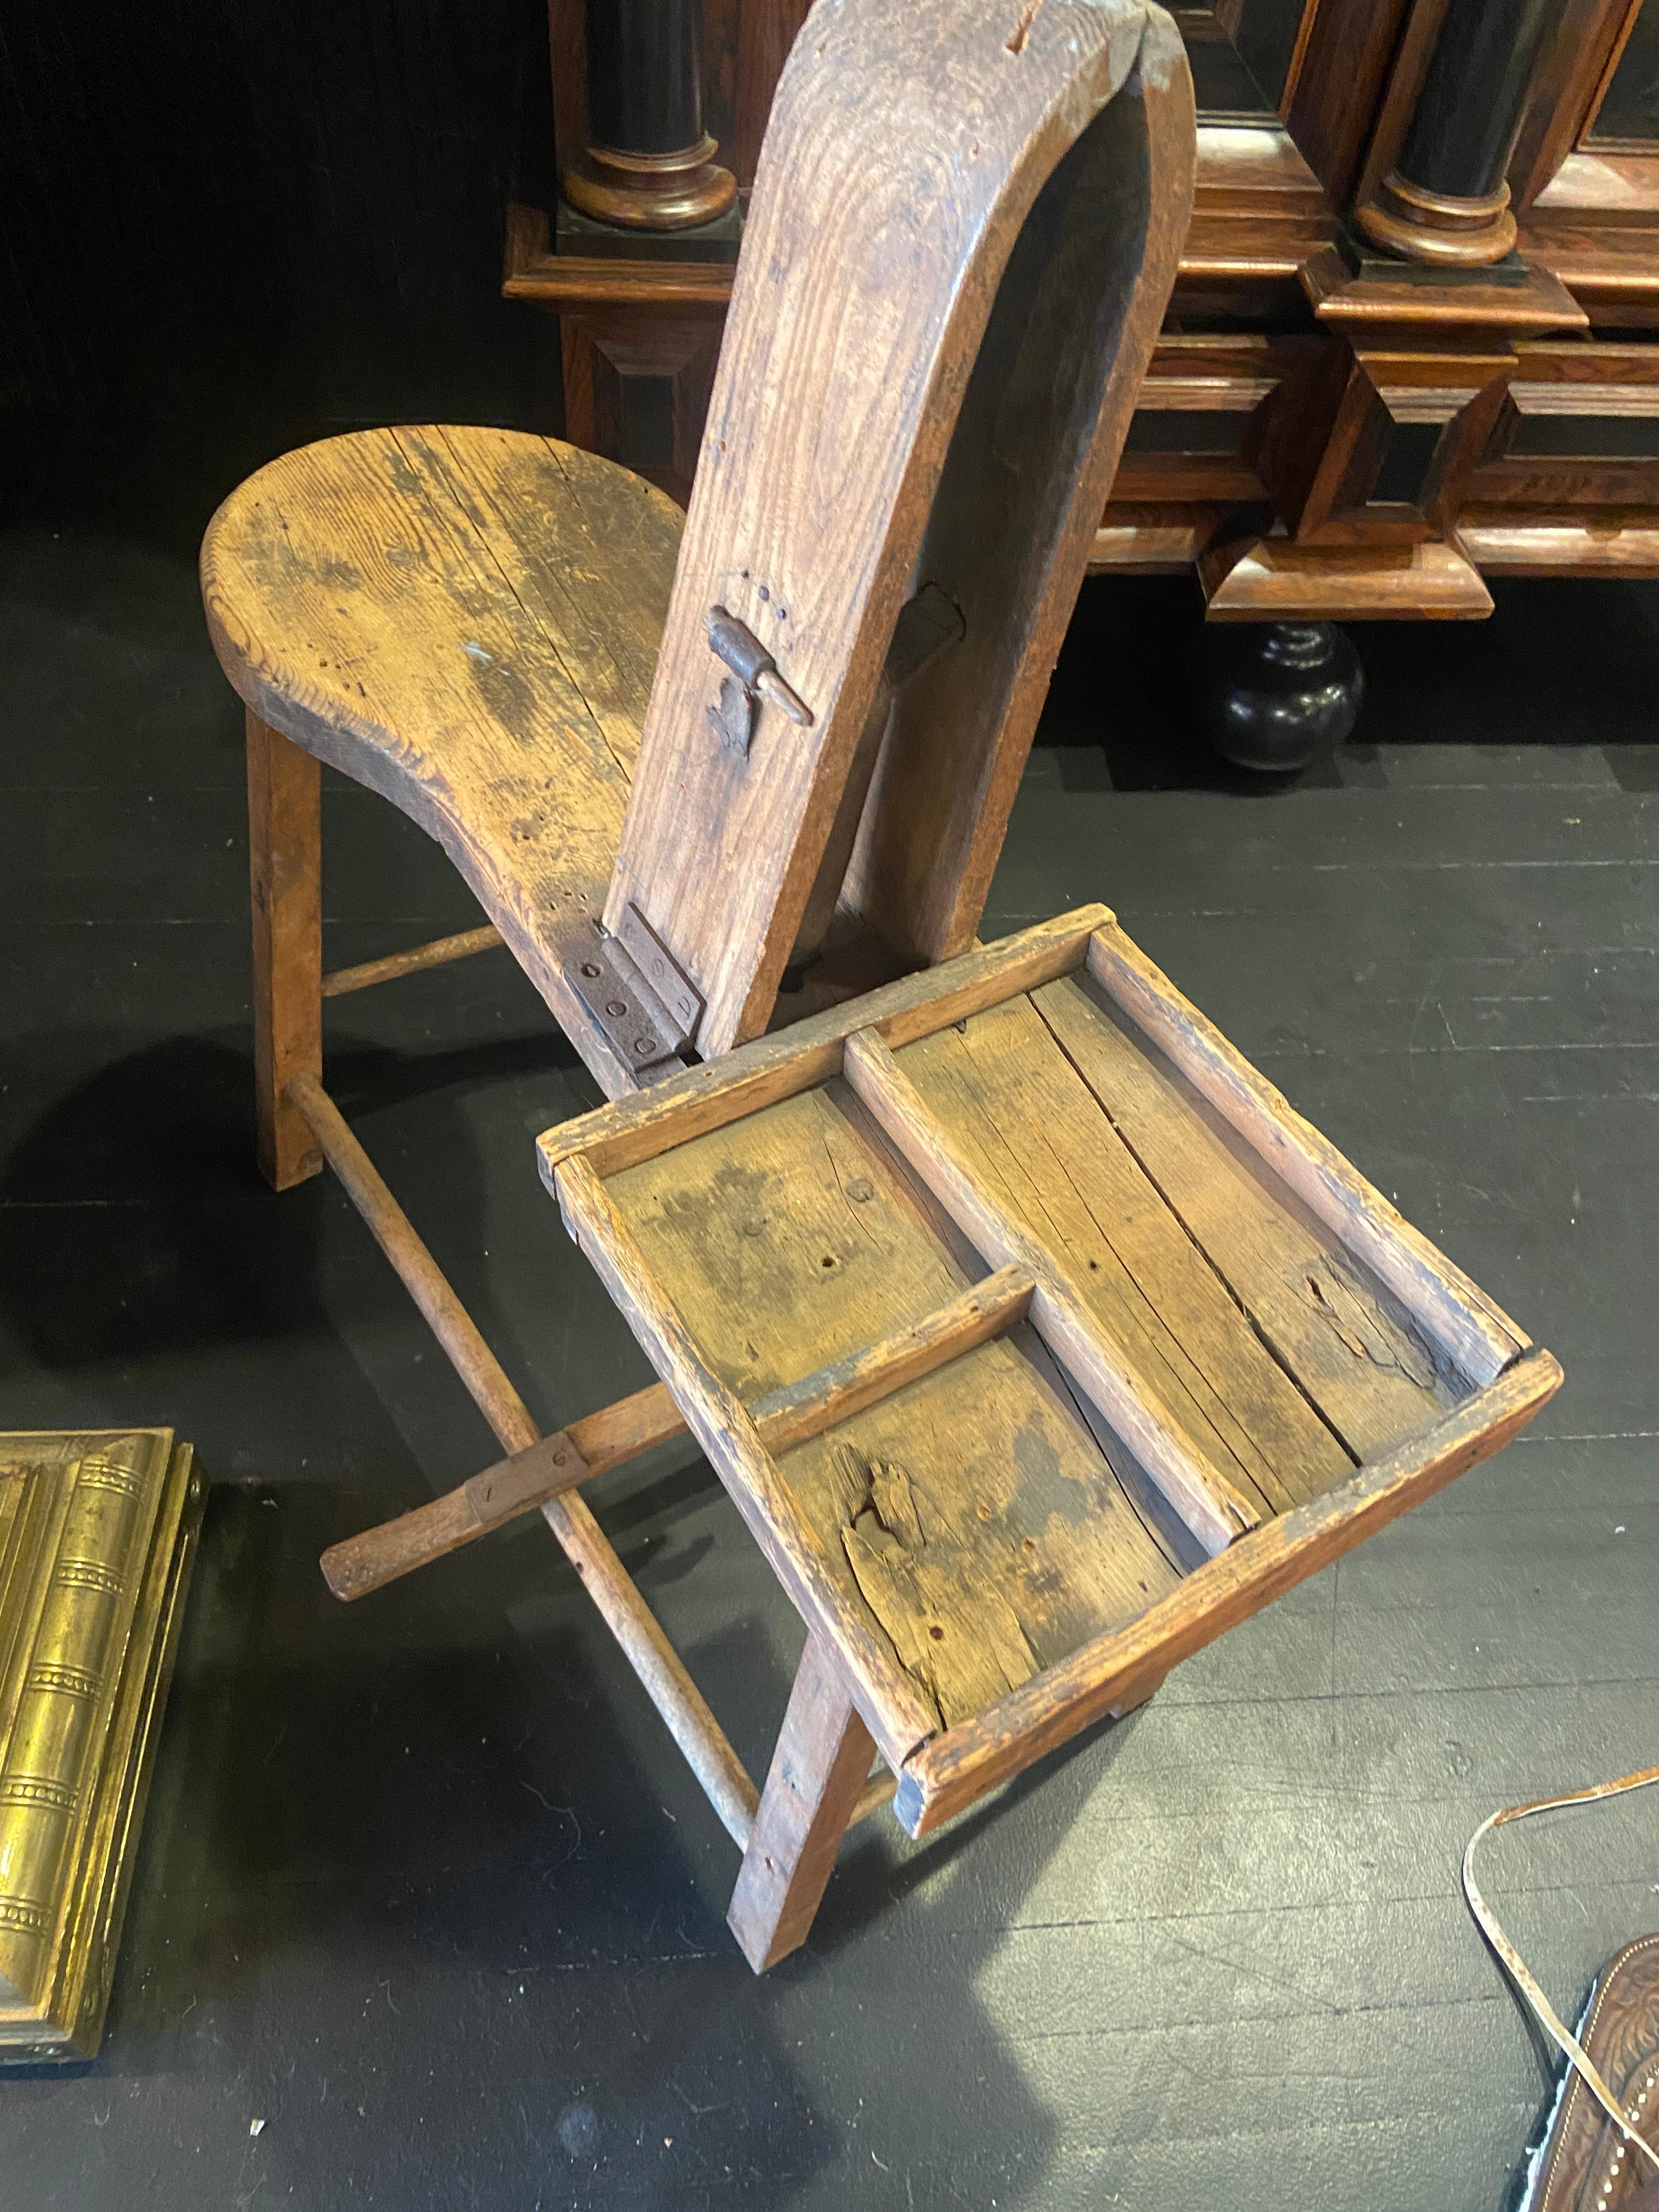 Step back in time and seize the opportunity to own a remarkable piece of American craftsmanship from the 1800s—a genuine cobbler's bench straight from the heart of the United States. This extraordinary antique, with its rich history and undeniable